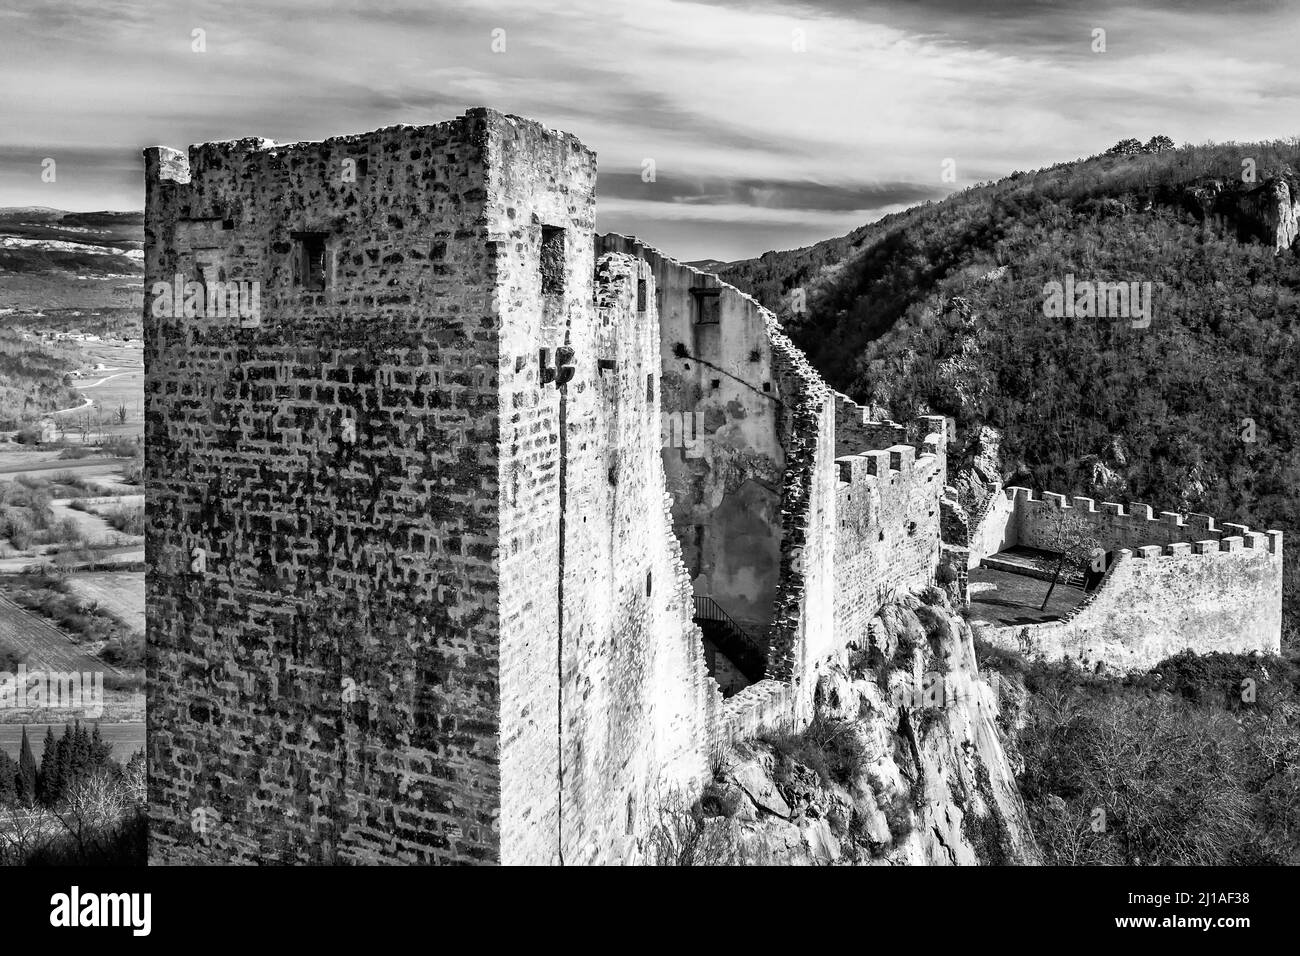 an aerial view of old castle Pietrapelosa, located between Buzet and Livade, Istria, black and white, Croatia Stock Photo